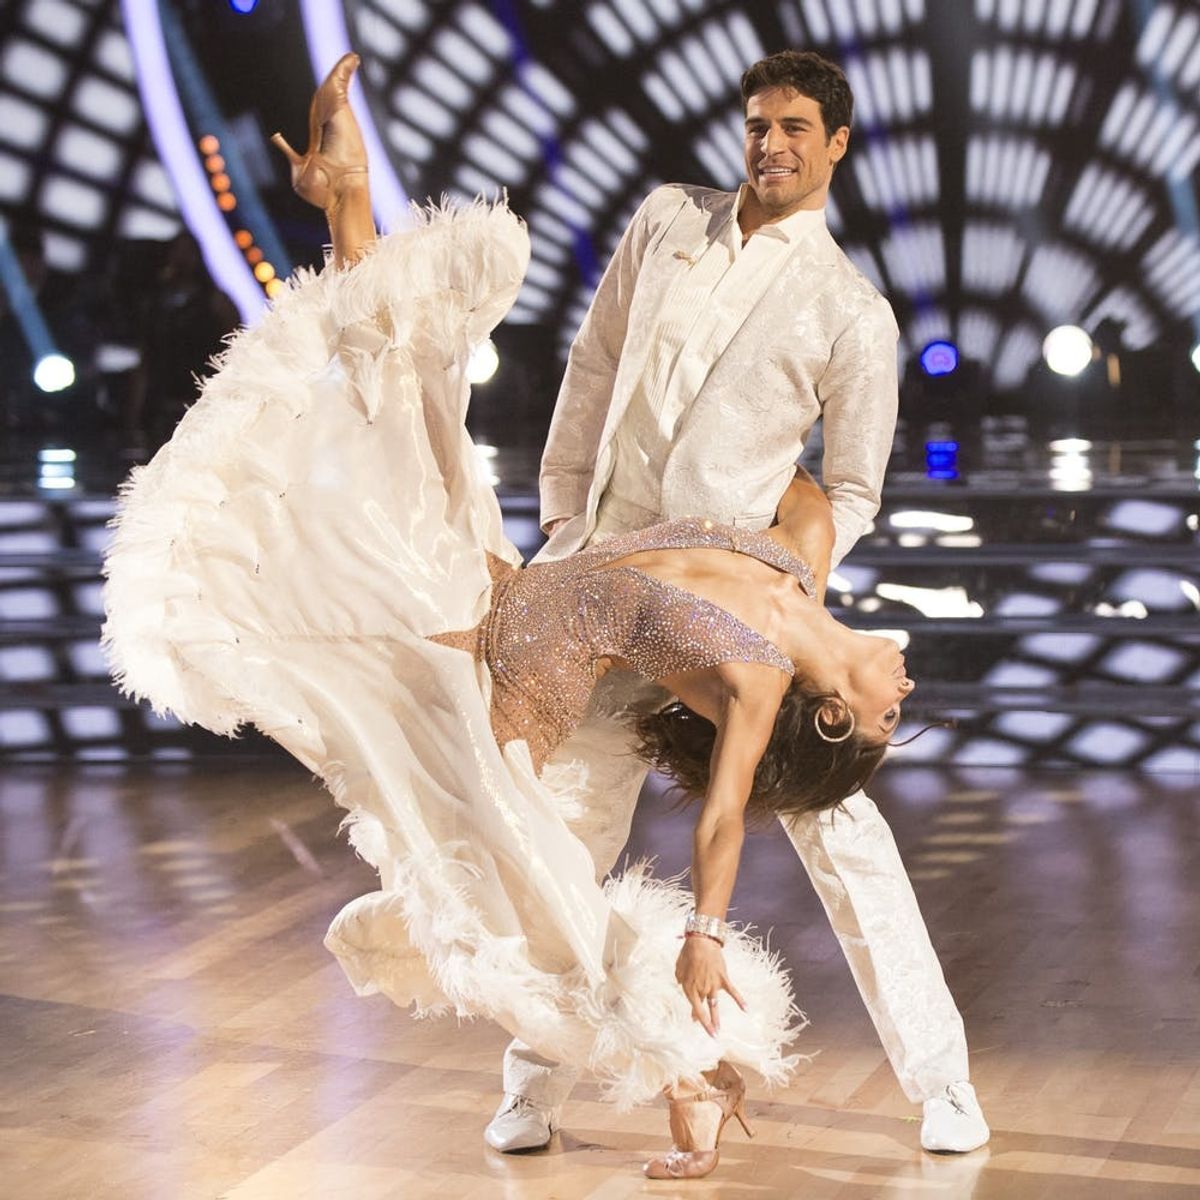 Here’s How ‘Bachelorette’ Star ‘Grocery Store Joe’ Amabile Did on Night 1 of ‘DWTS’